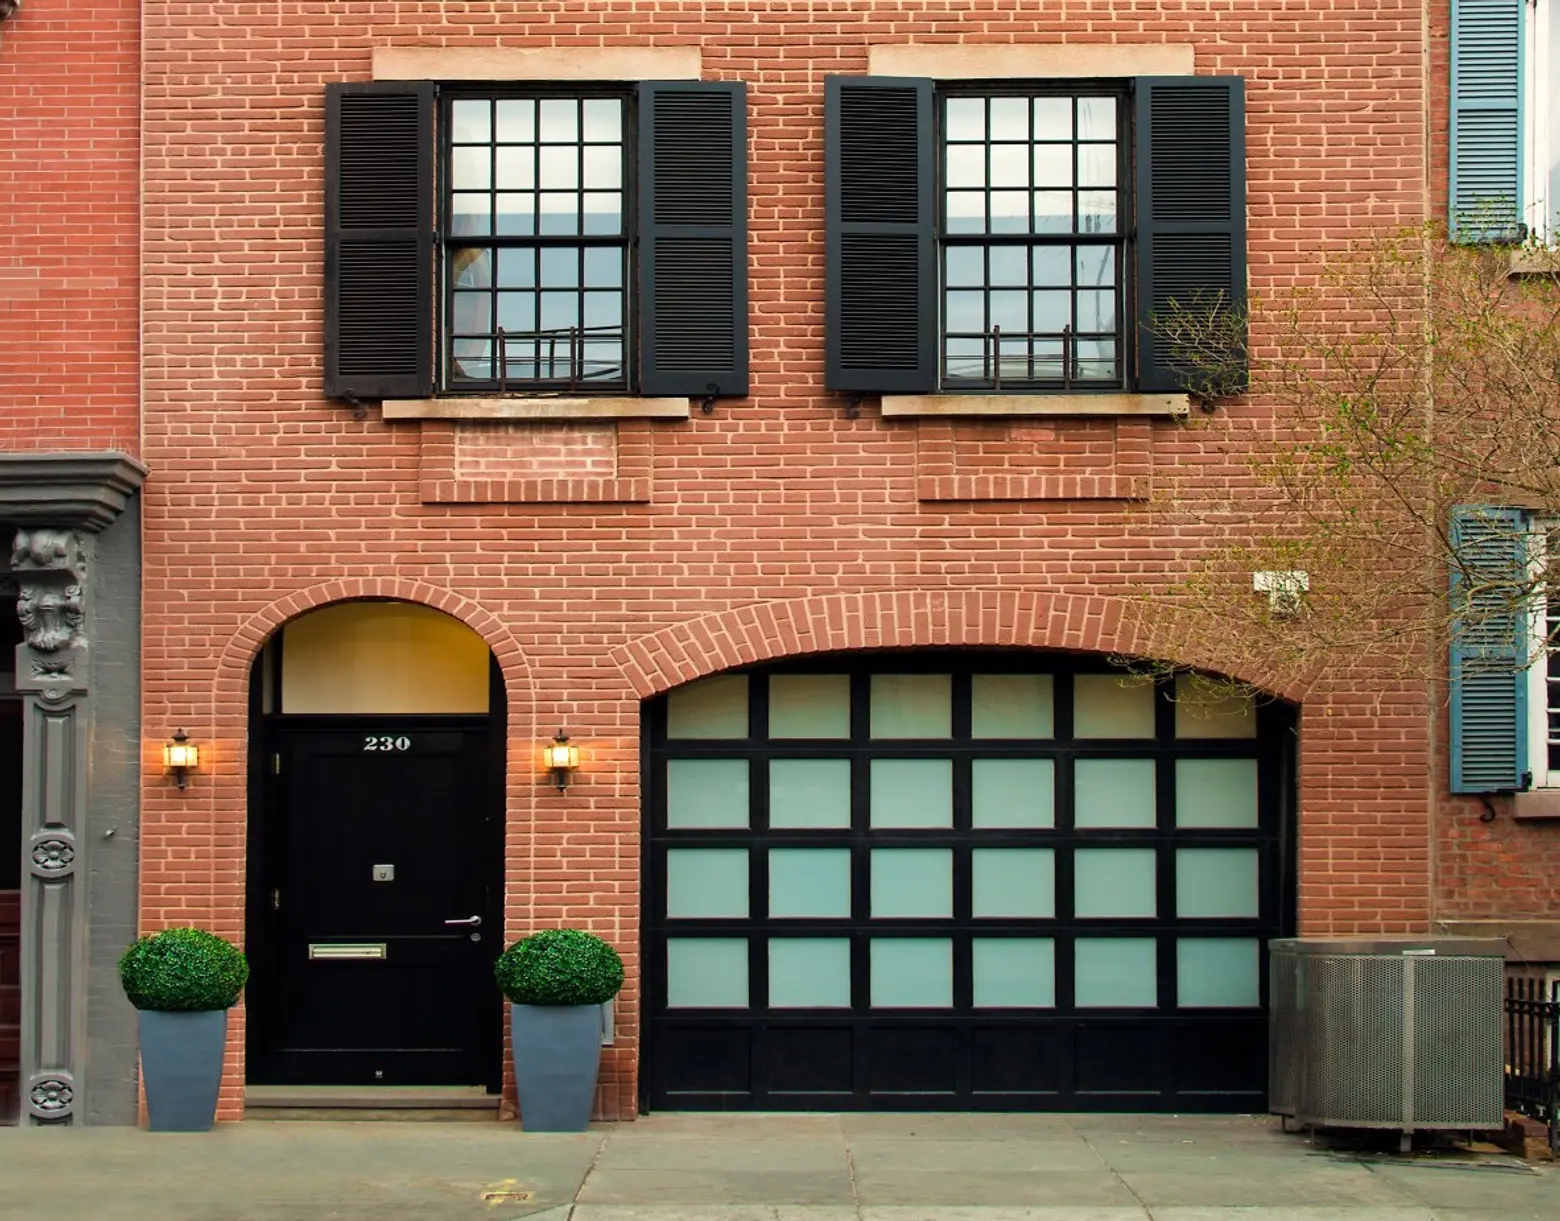 230 West 10th Street, Cool Listings, Historic Homes, carriage house, townhouse, Greenwich Village, Jean Lignel, Art Collector, Jeffrey Flanigan, Keith Haring, Warhol, Ida Applebroog, Manhattan townhouse for sale